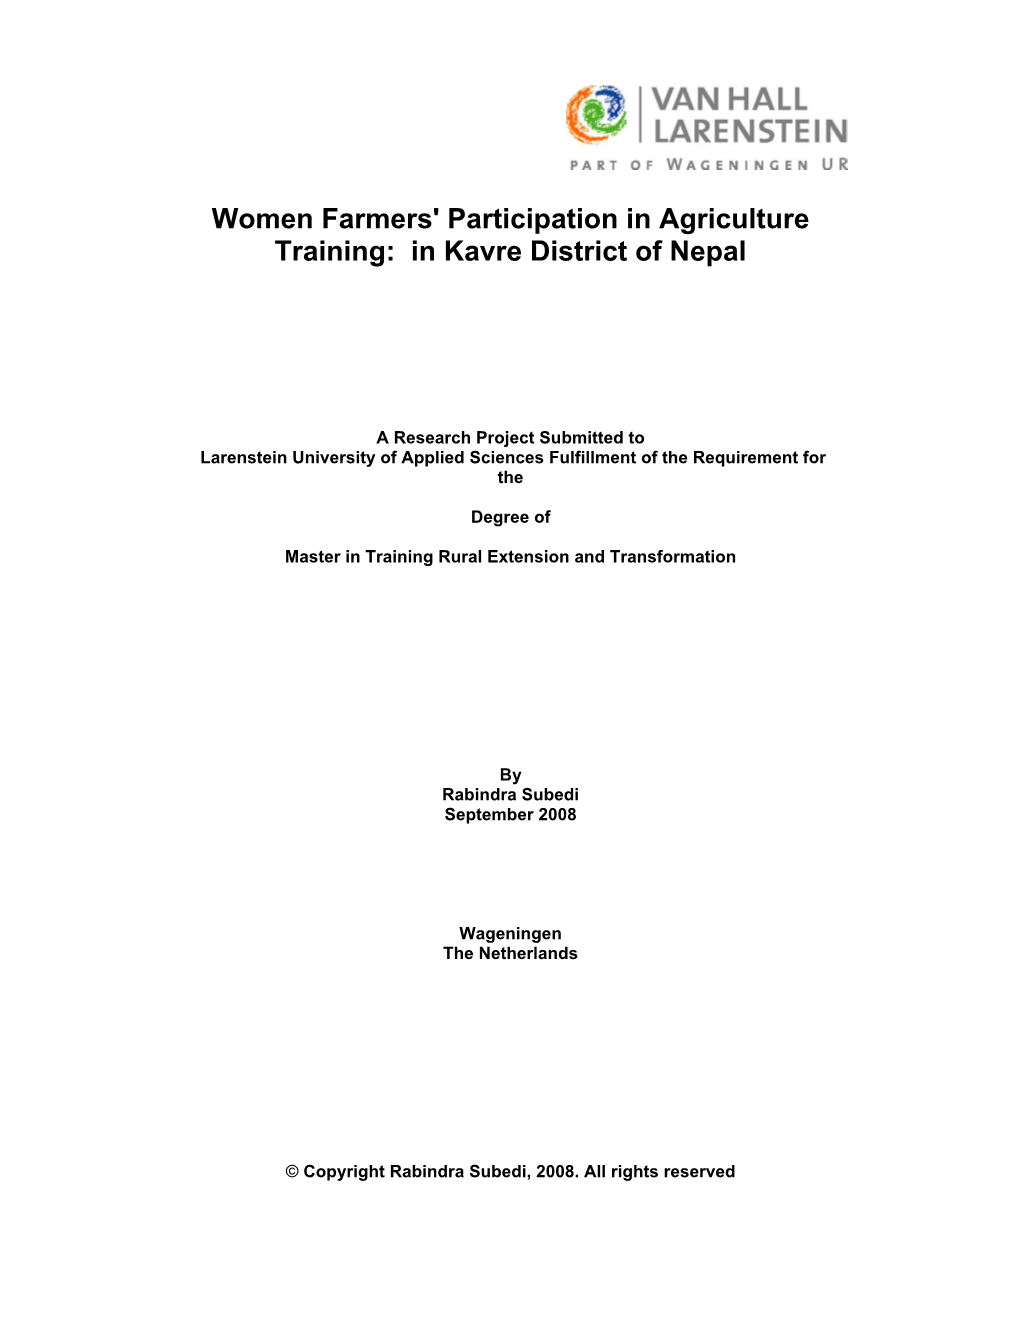 Women Farmers' Participation in Agriculture Training: in Kavre District of Nepal